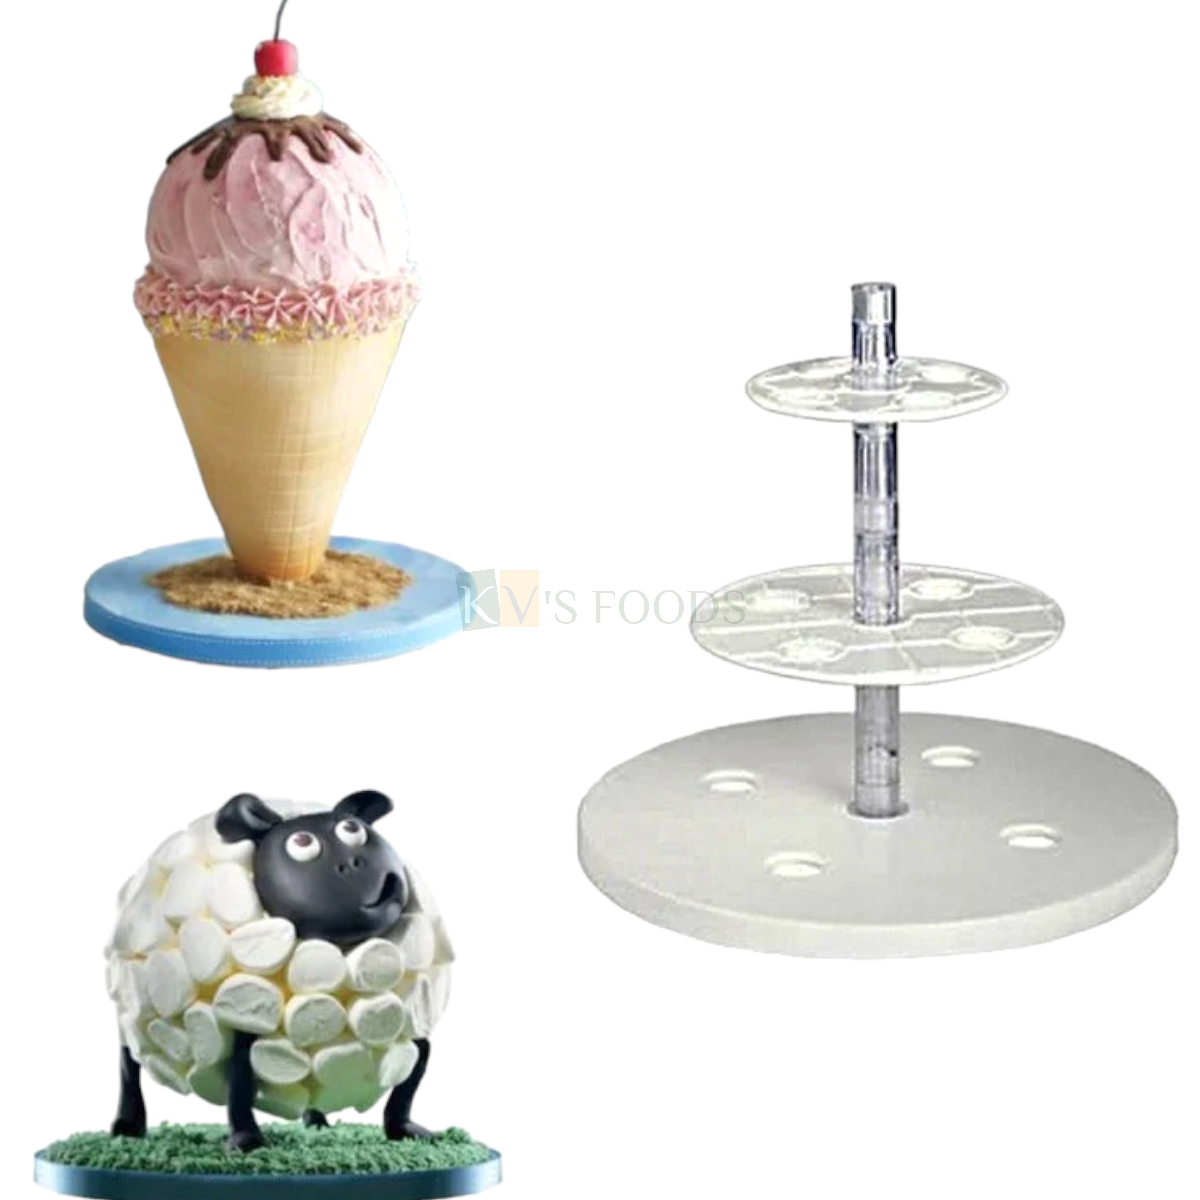 1 PC 3 Tiers Spheres Cake Frame Kit Stand Cake Pouring Kit Reusable Anti Gravity Ice Cream Cone Support Structure DIY Multilayered Cake for Anniversary, Baby Shower Graduation Birthday Wedding Party